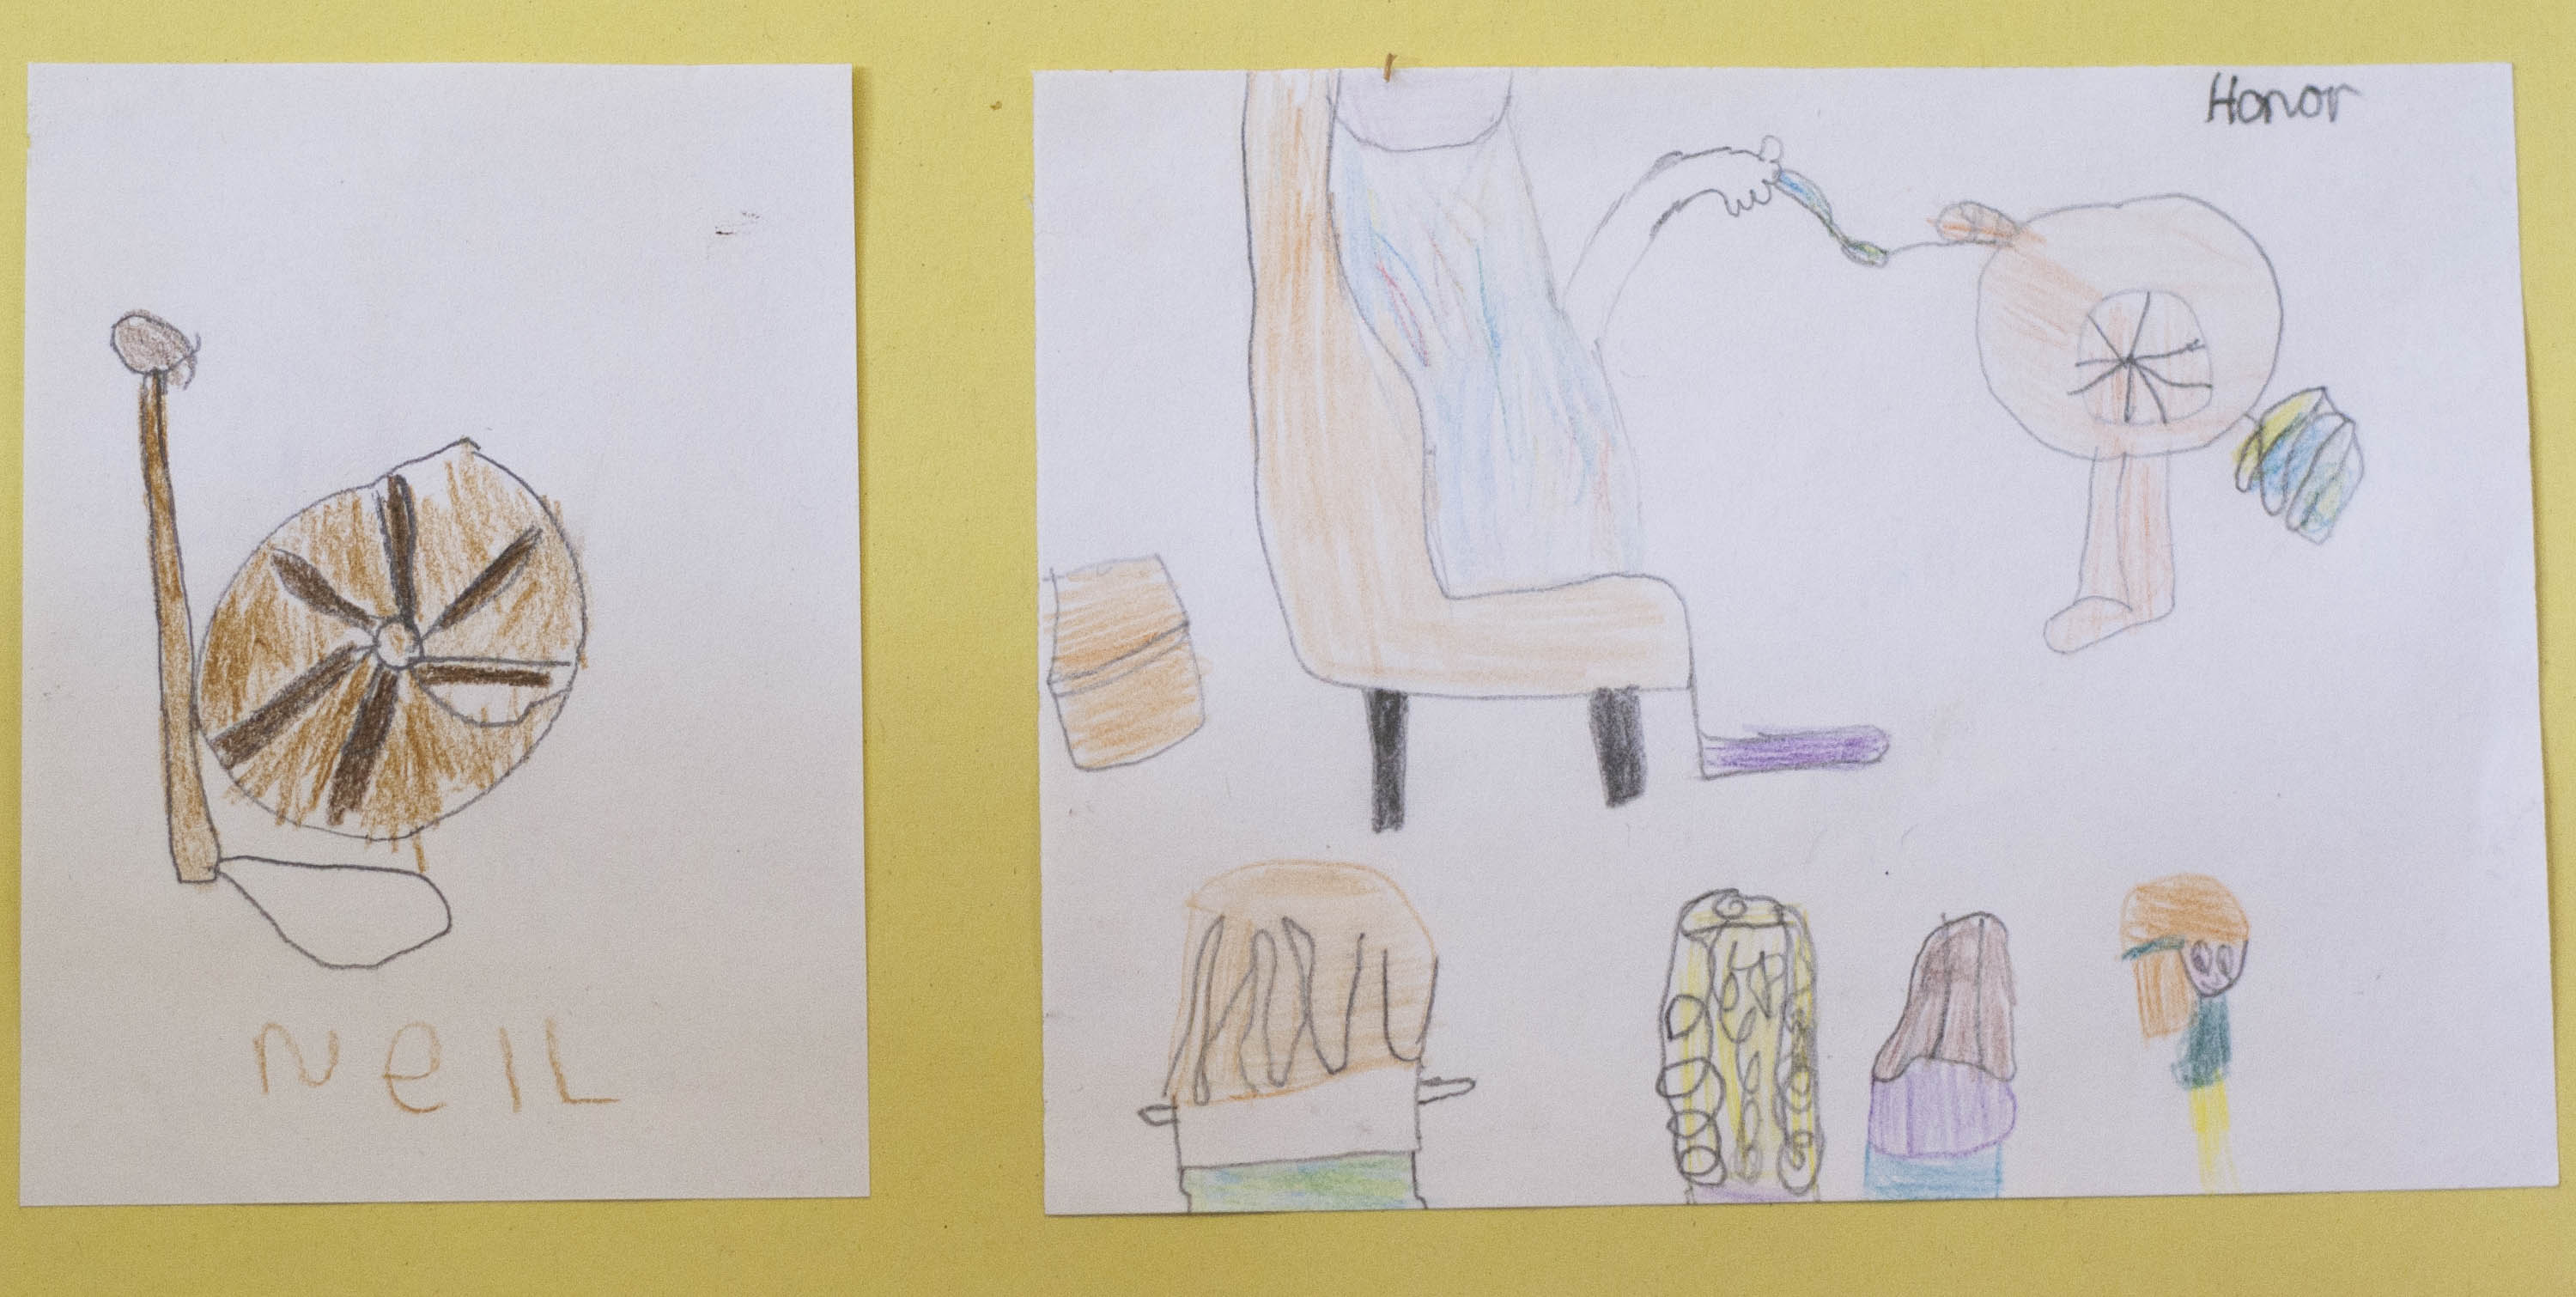 Children's drawings of a spinning wheel and a demonstration of a spinning wheel